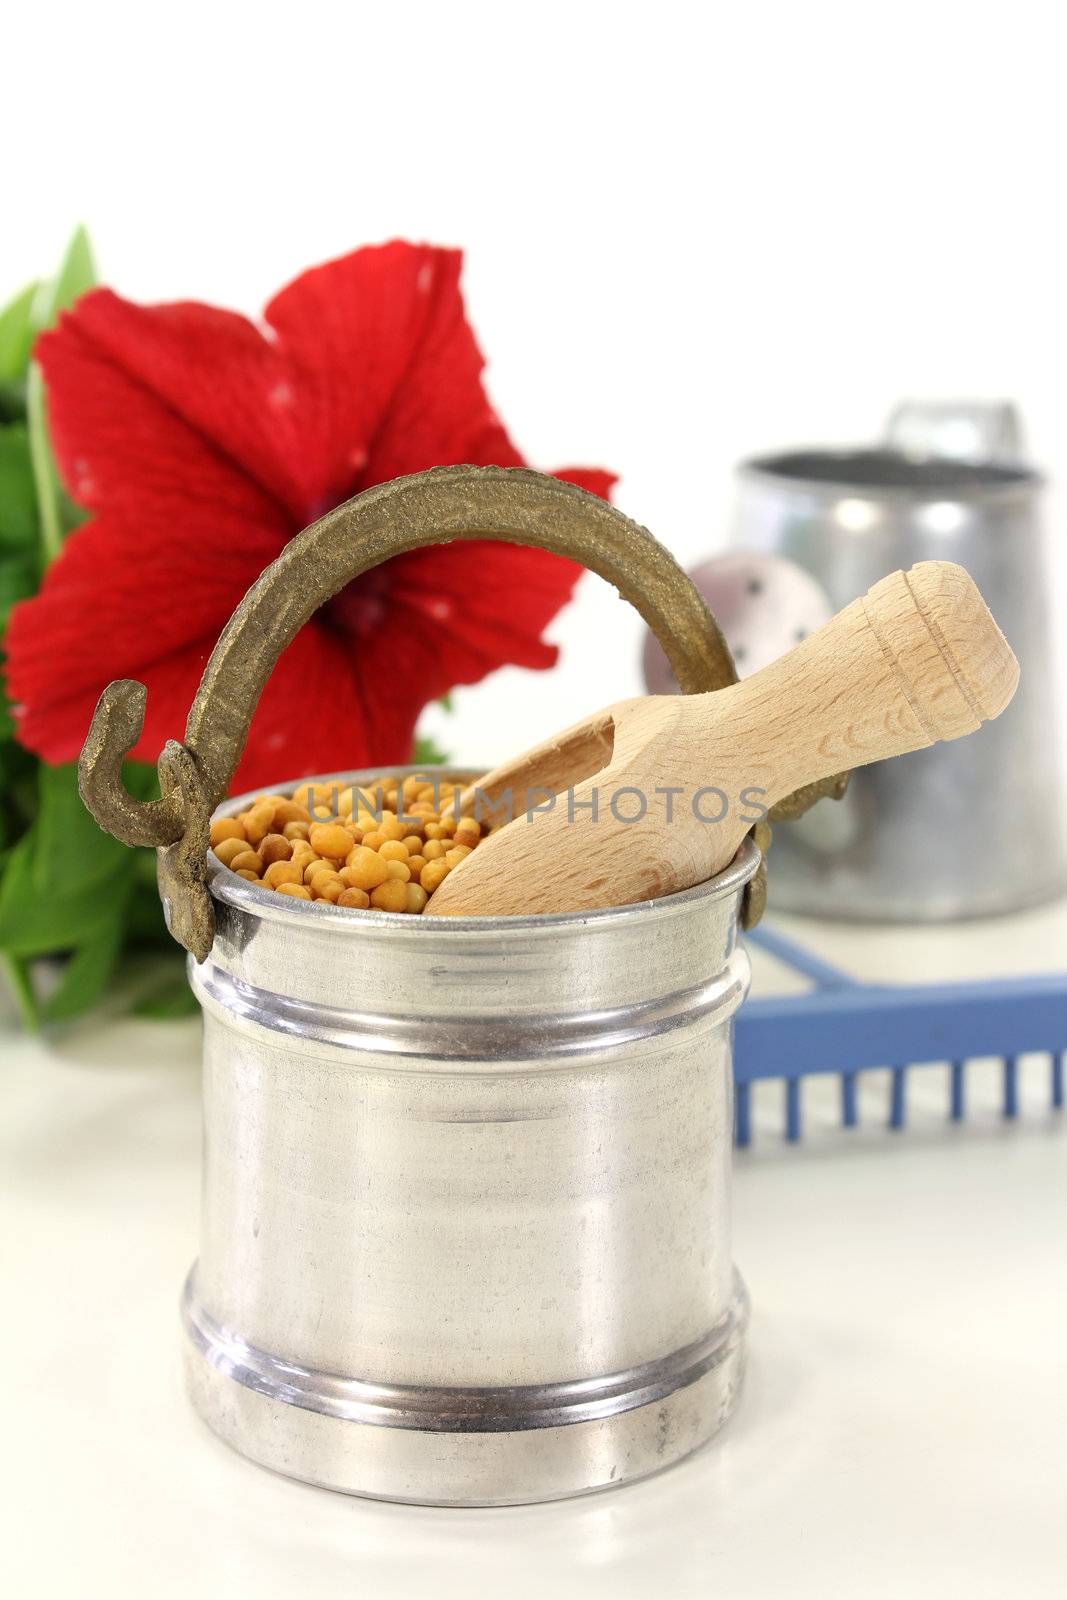 a bucket of slow release fertilizer in front of white background